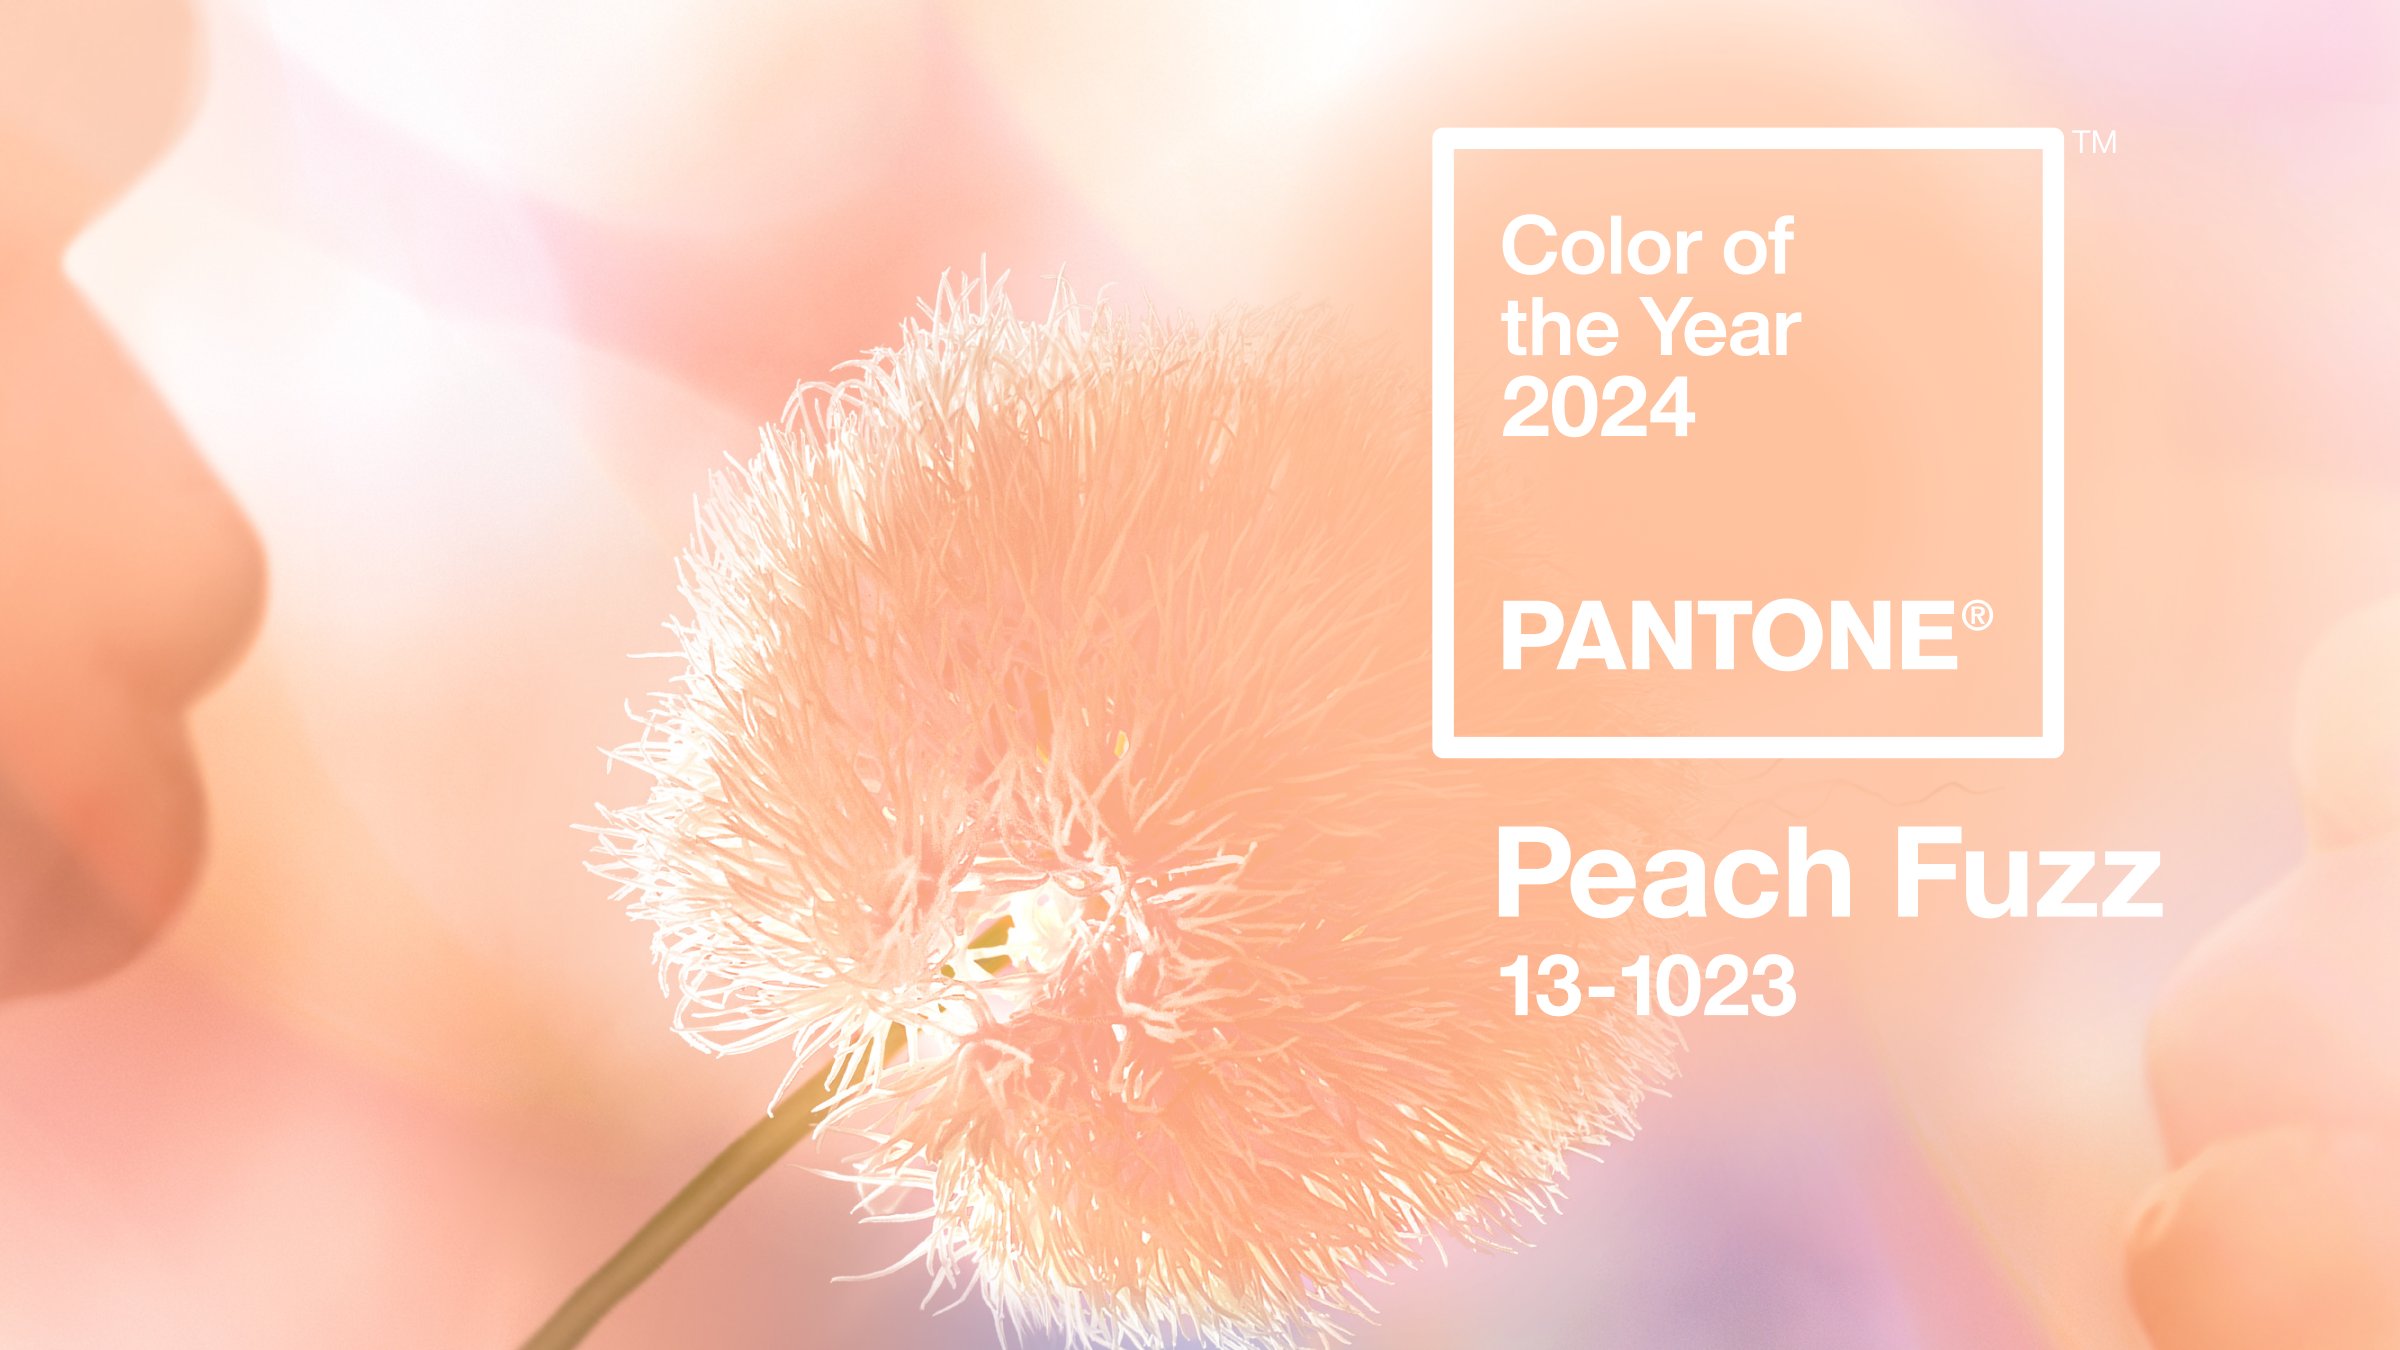 graphical-activity-graphiste-moselle-pantone-color-of-the-year-2024